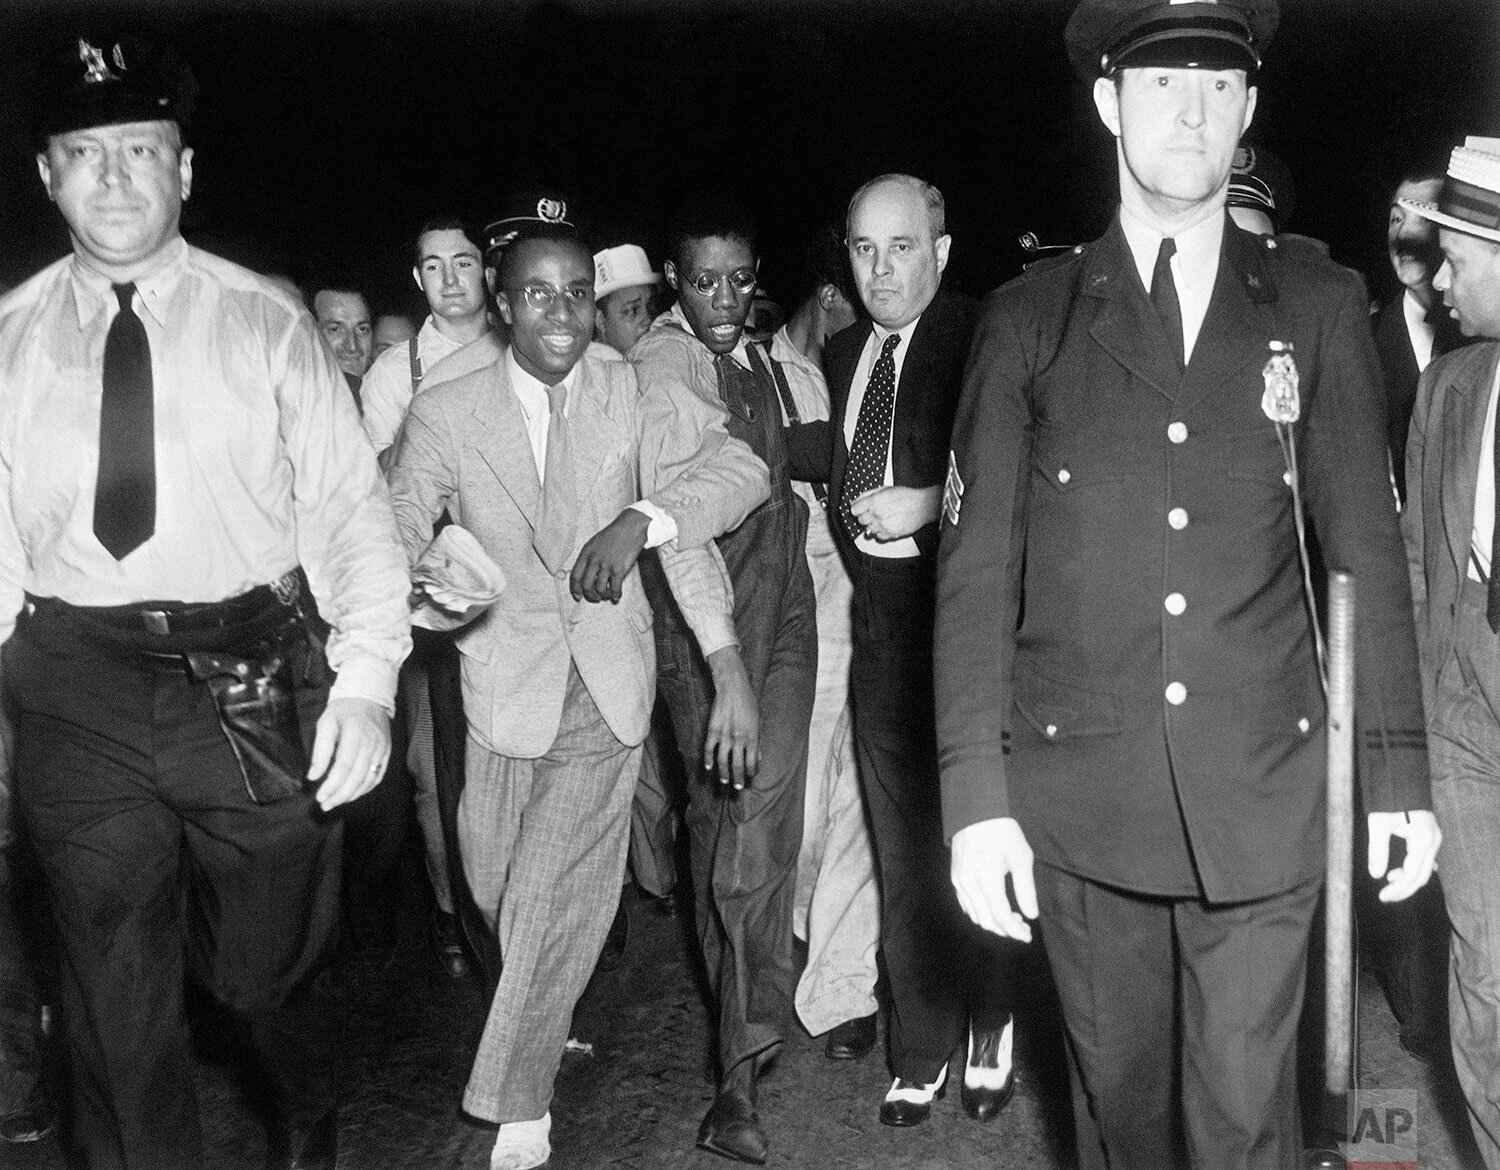  Apparently bewildered by the attention of an uncontrollable crowd, Olen Montgomery, one of the Scottsboro defendants is led through Penn Station upon arrival in New York City, July 26, 1937 by his attorney, Sam Liebowitz while an officer marches ahe